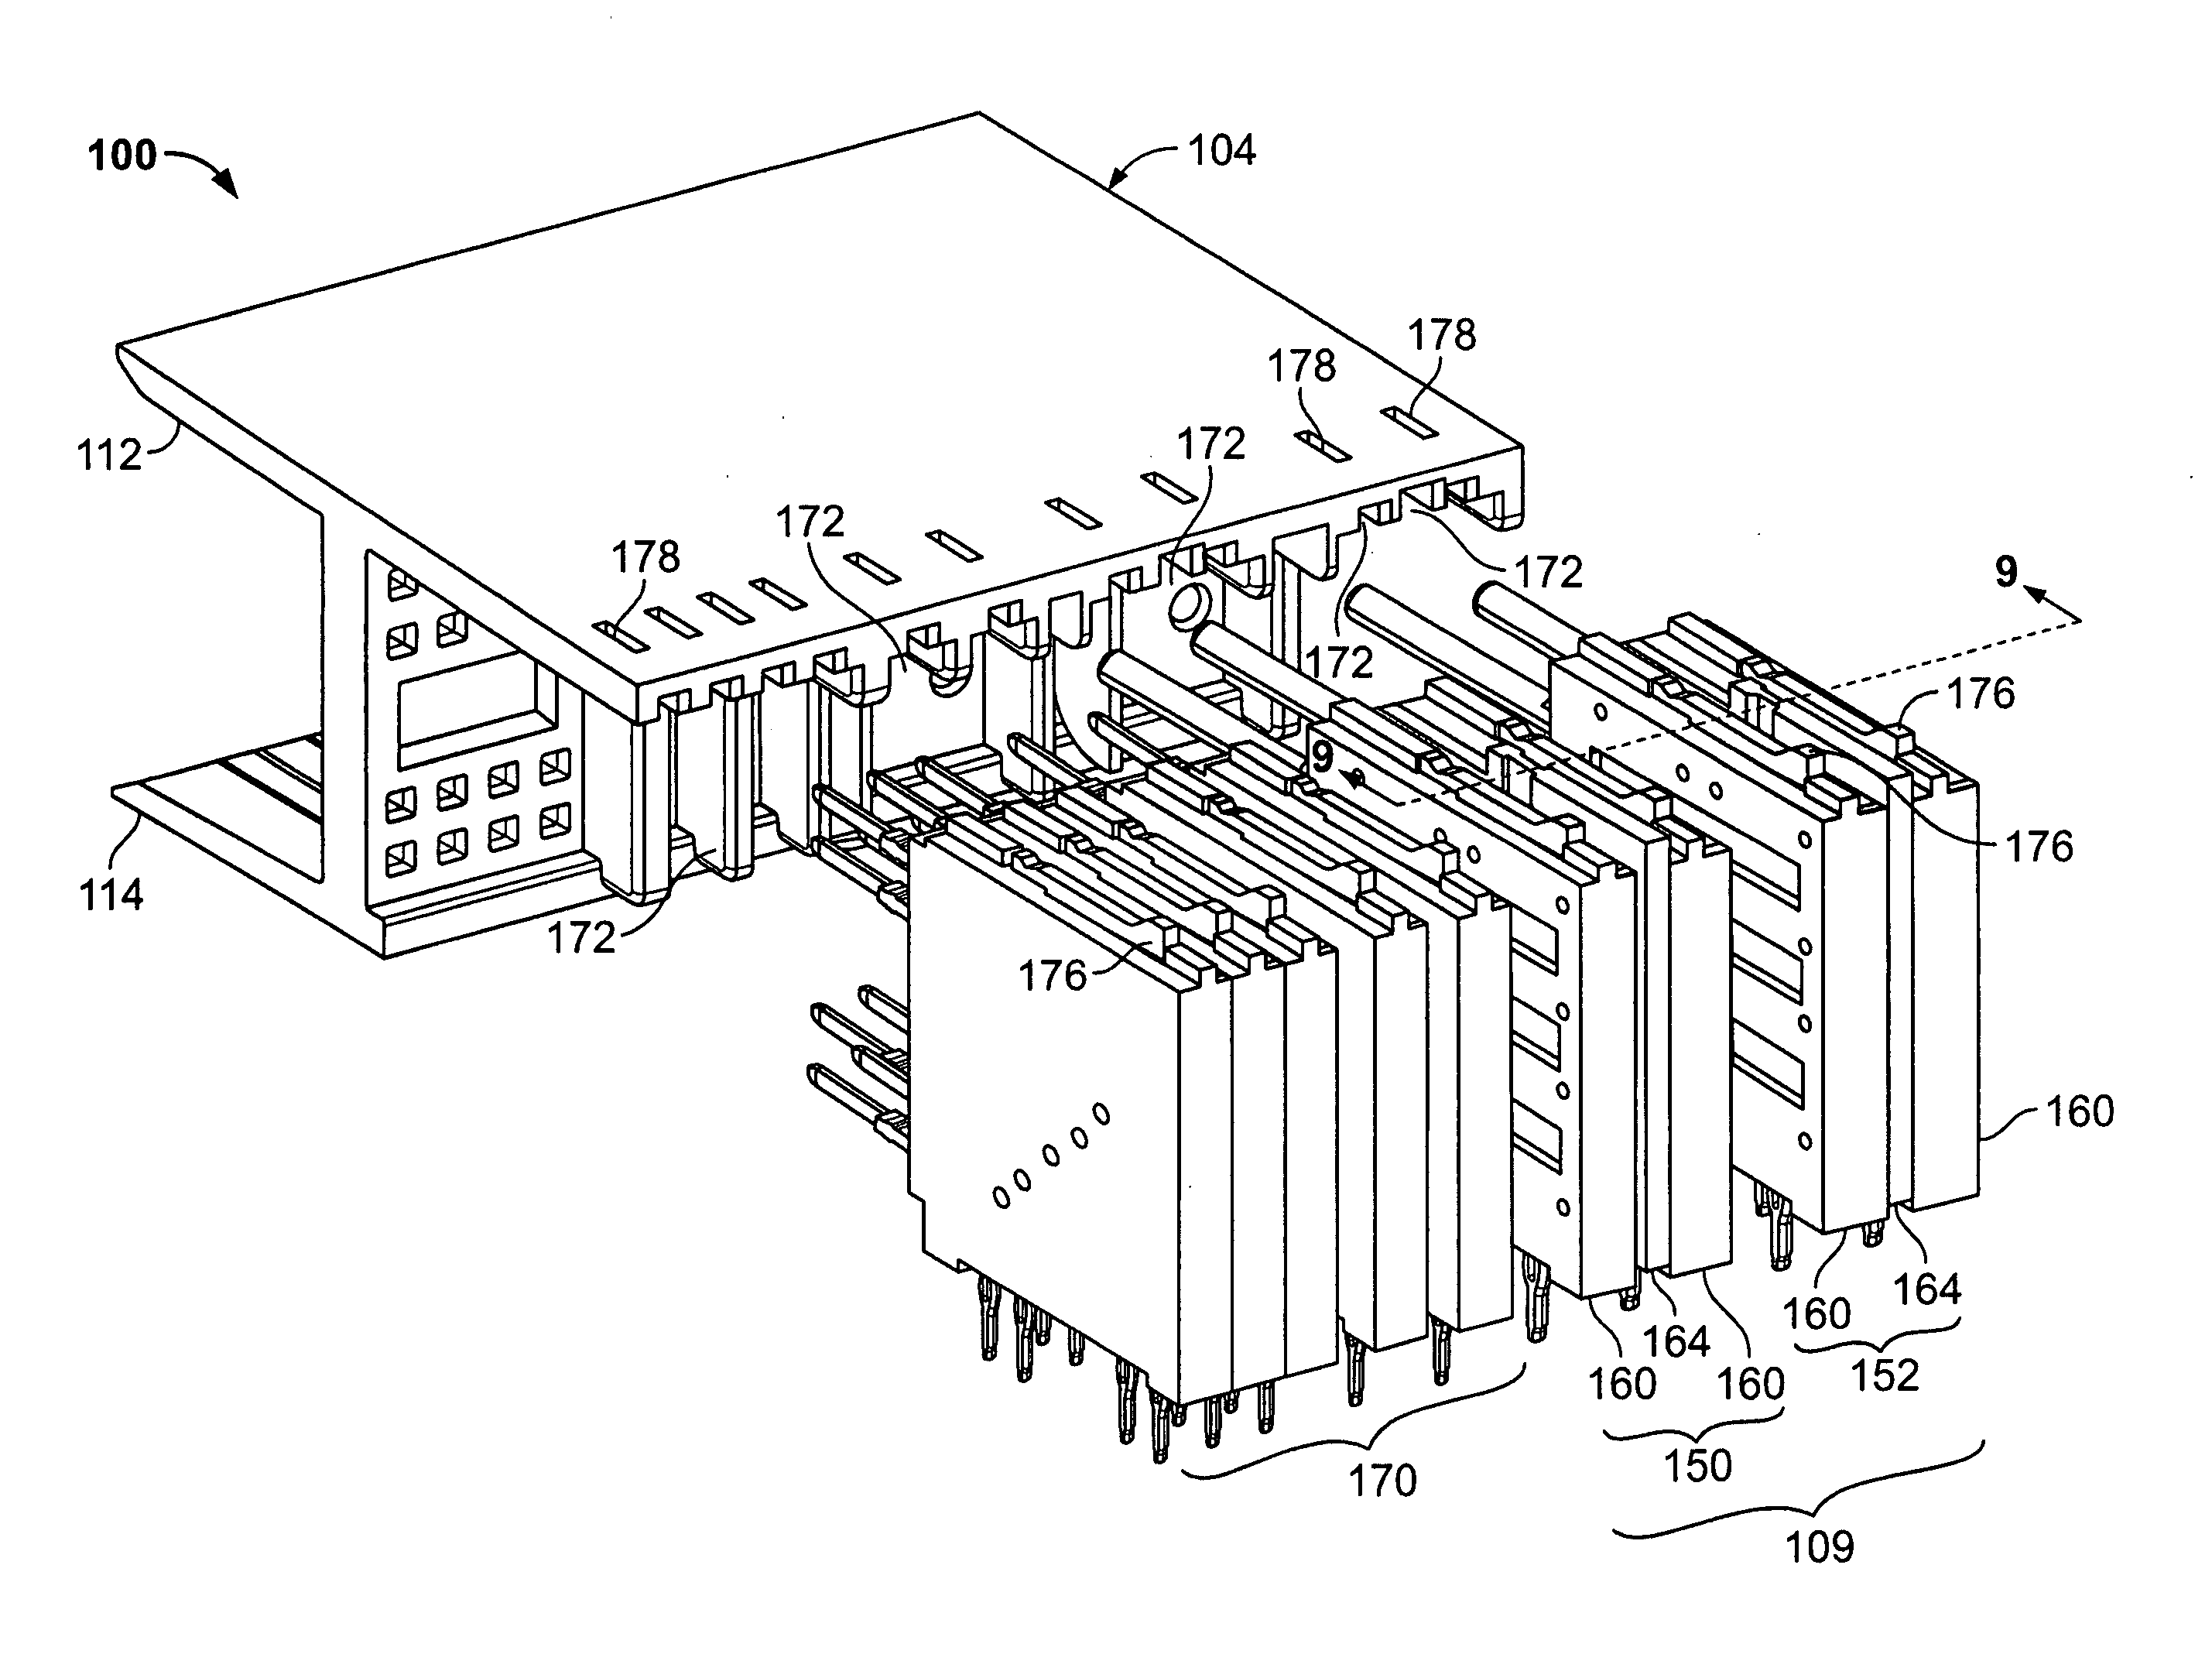 Modular connector assembly with adjustable distance between contact wafers